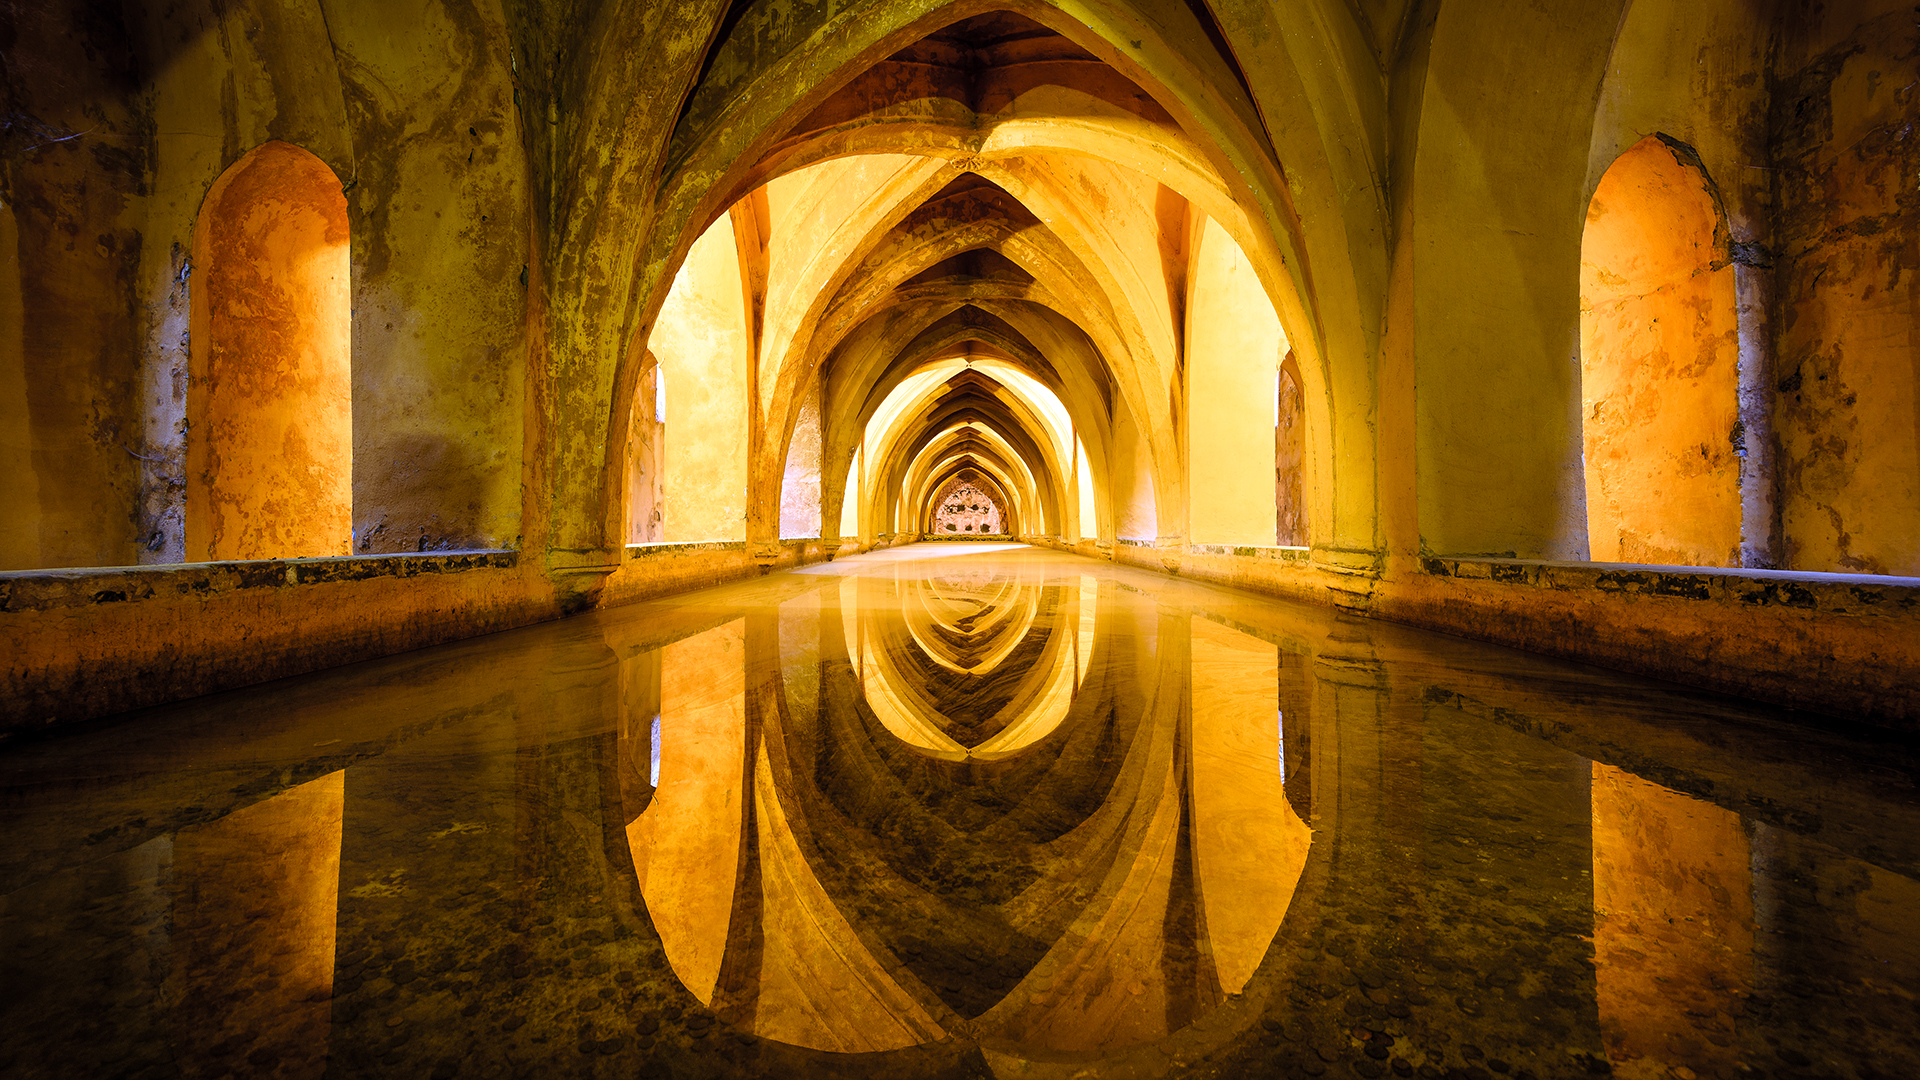 Architecture Building Sevilla Spain Arch Symmetry Reflection Bath Water Ancient Yellow Calm Waters 1920x1080